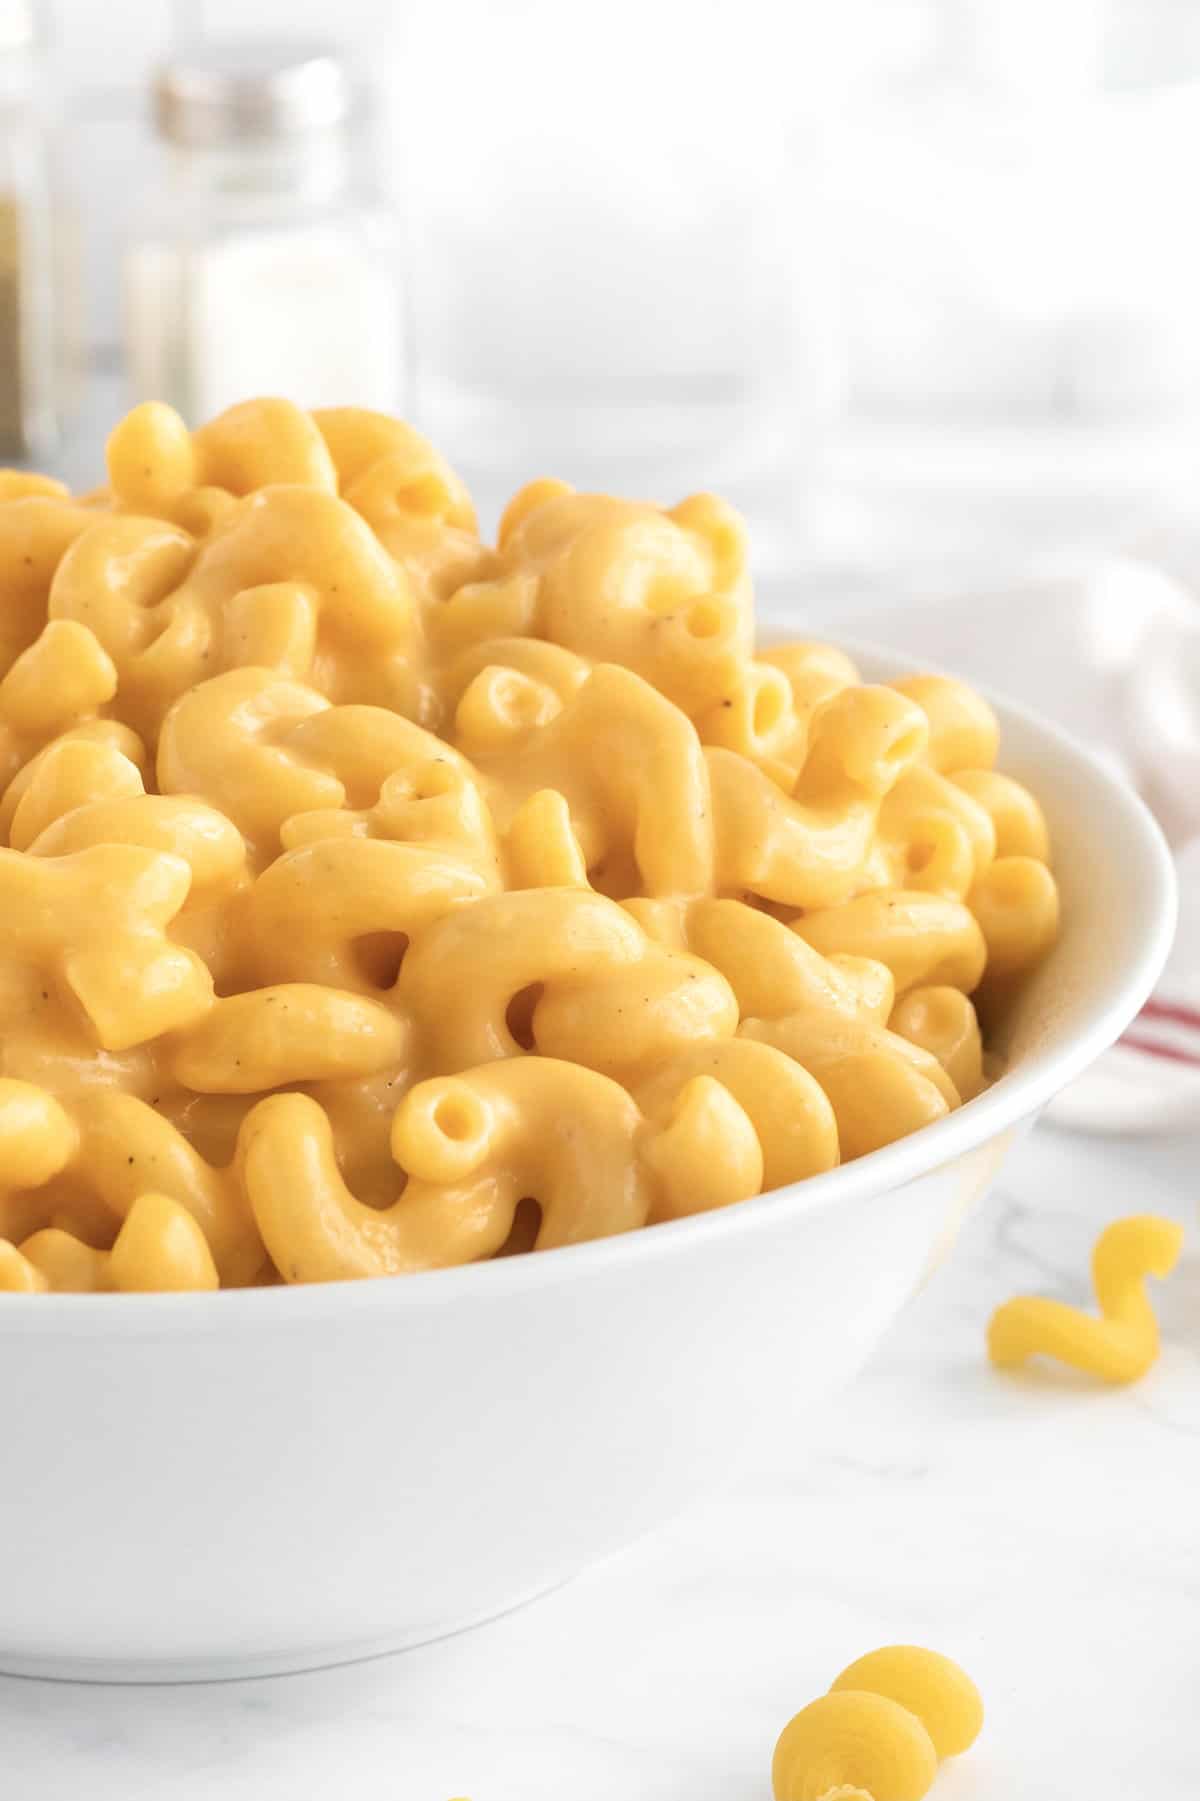 A large white bowl filled with macaroni and cheese.